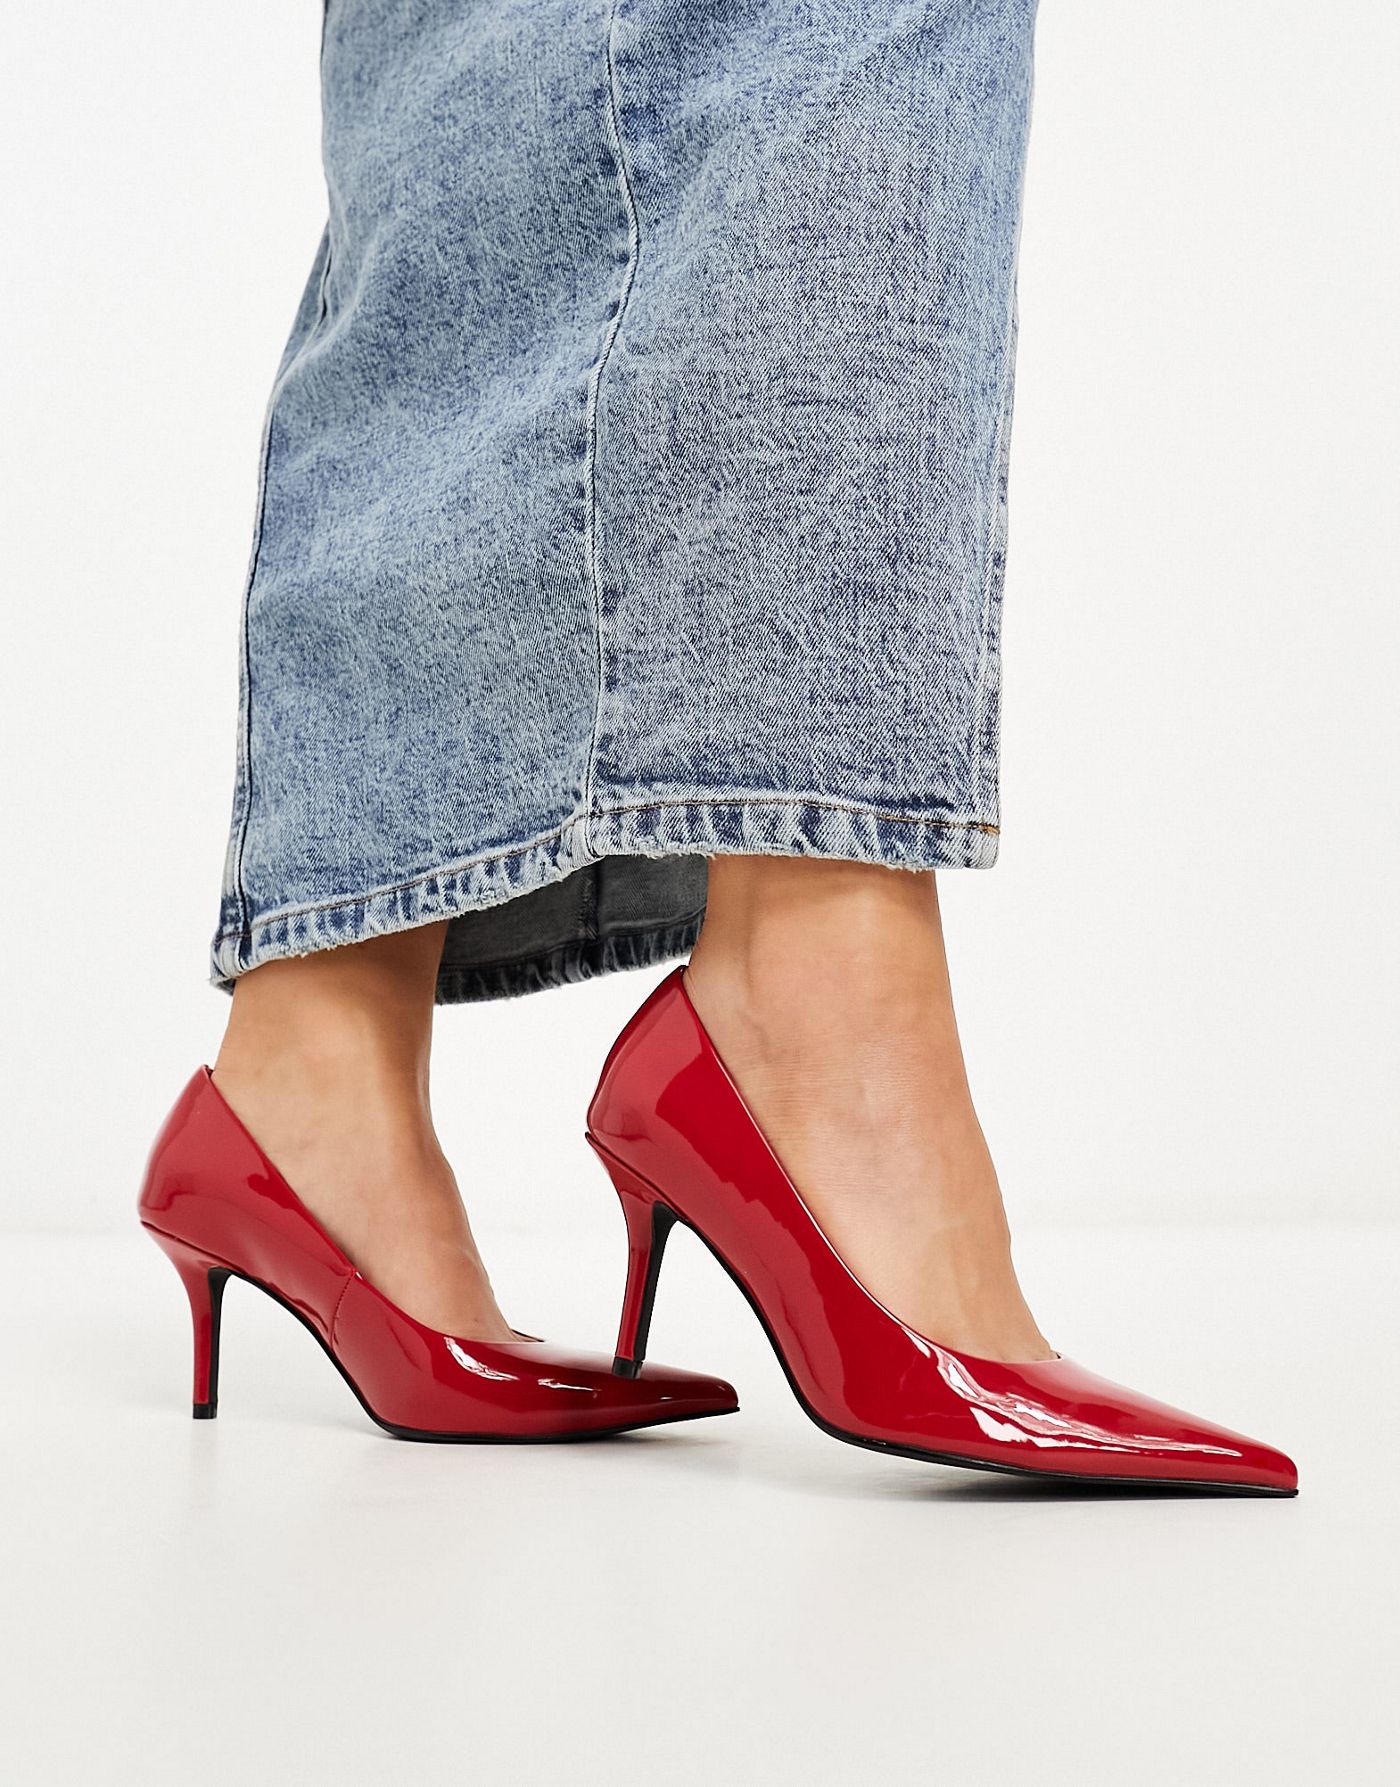 ASOS DESIGN Wide Fit Sienna mid heeled court shoes in red